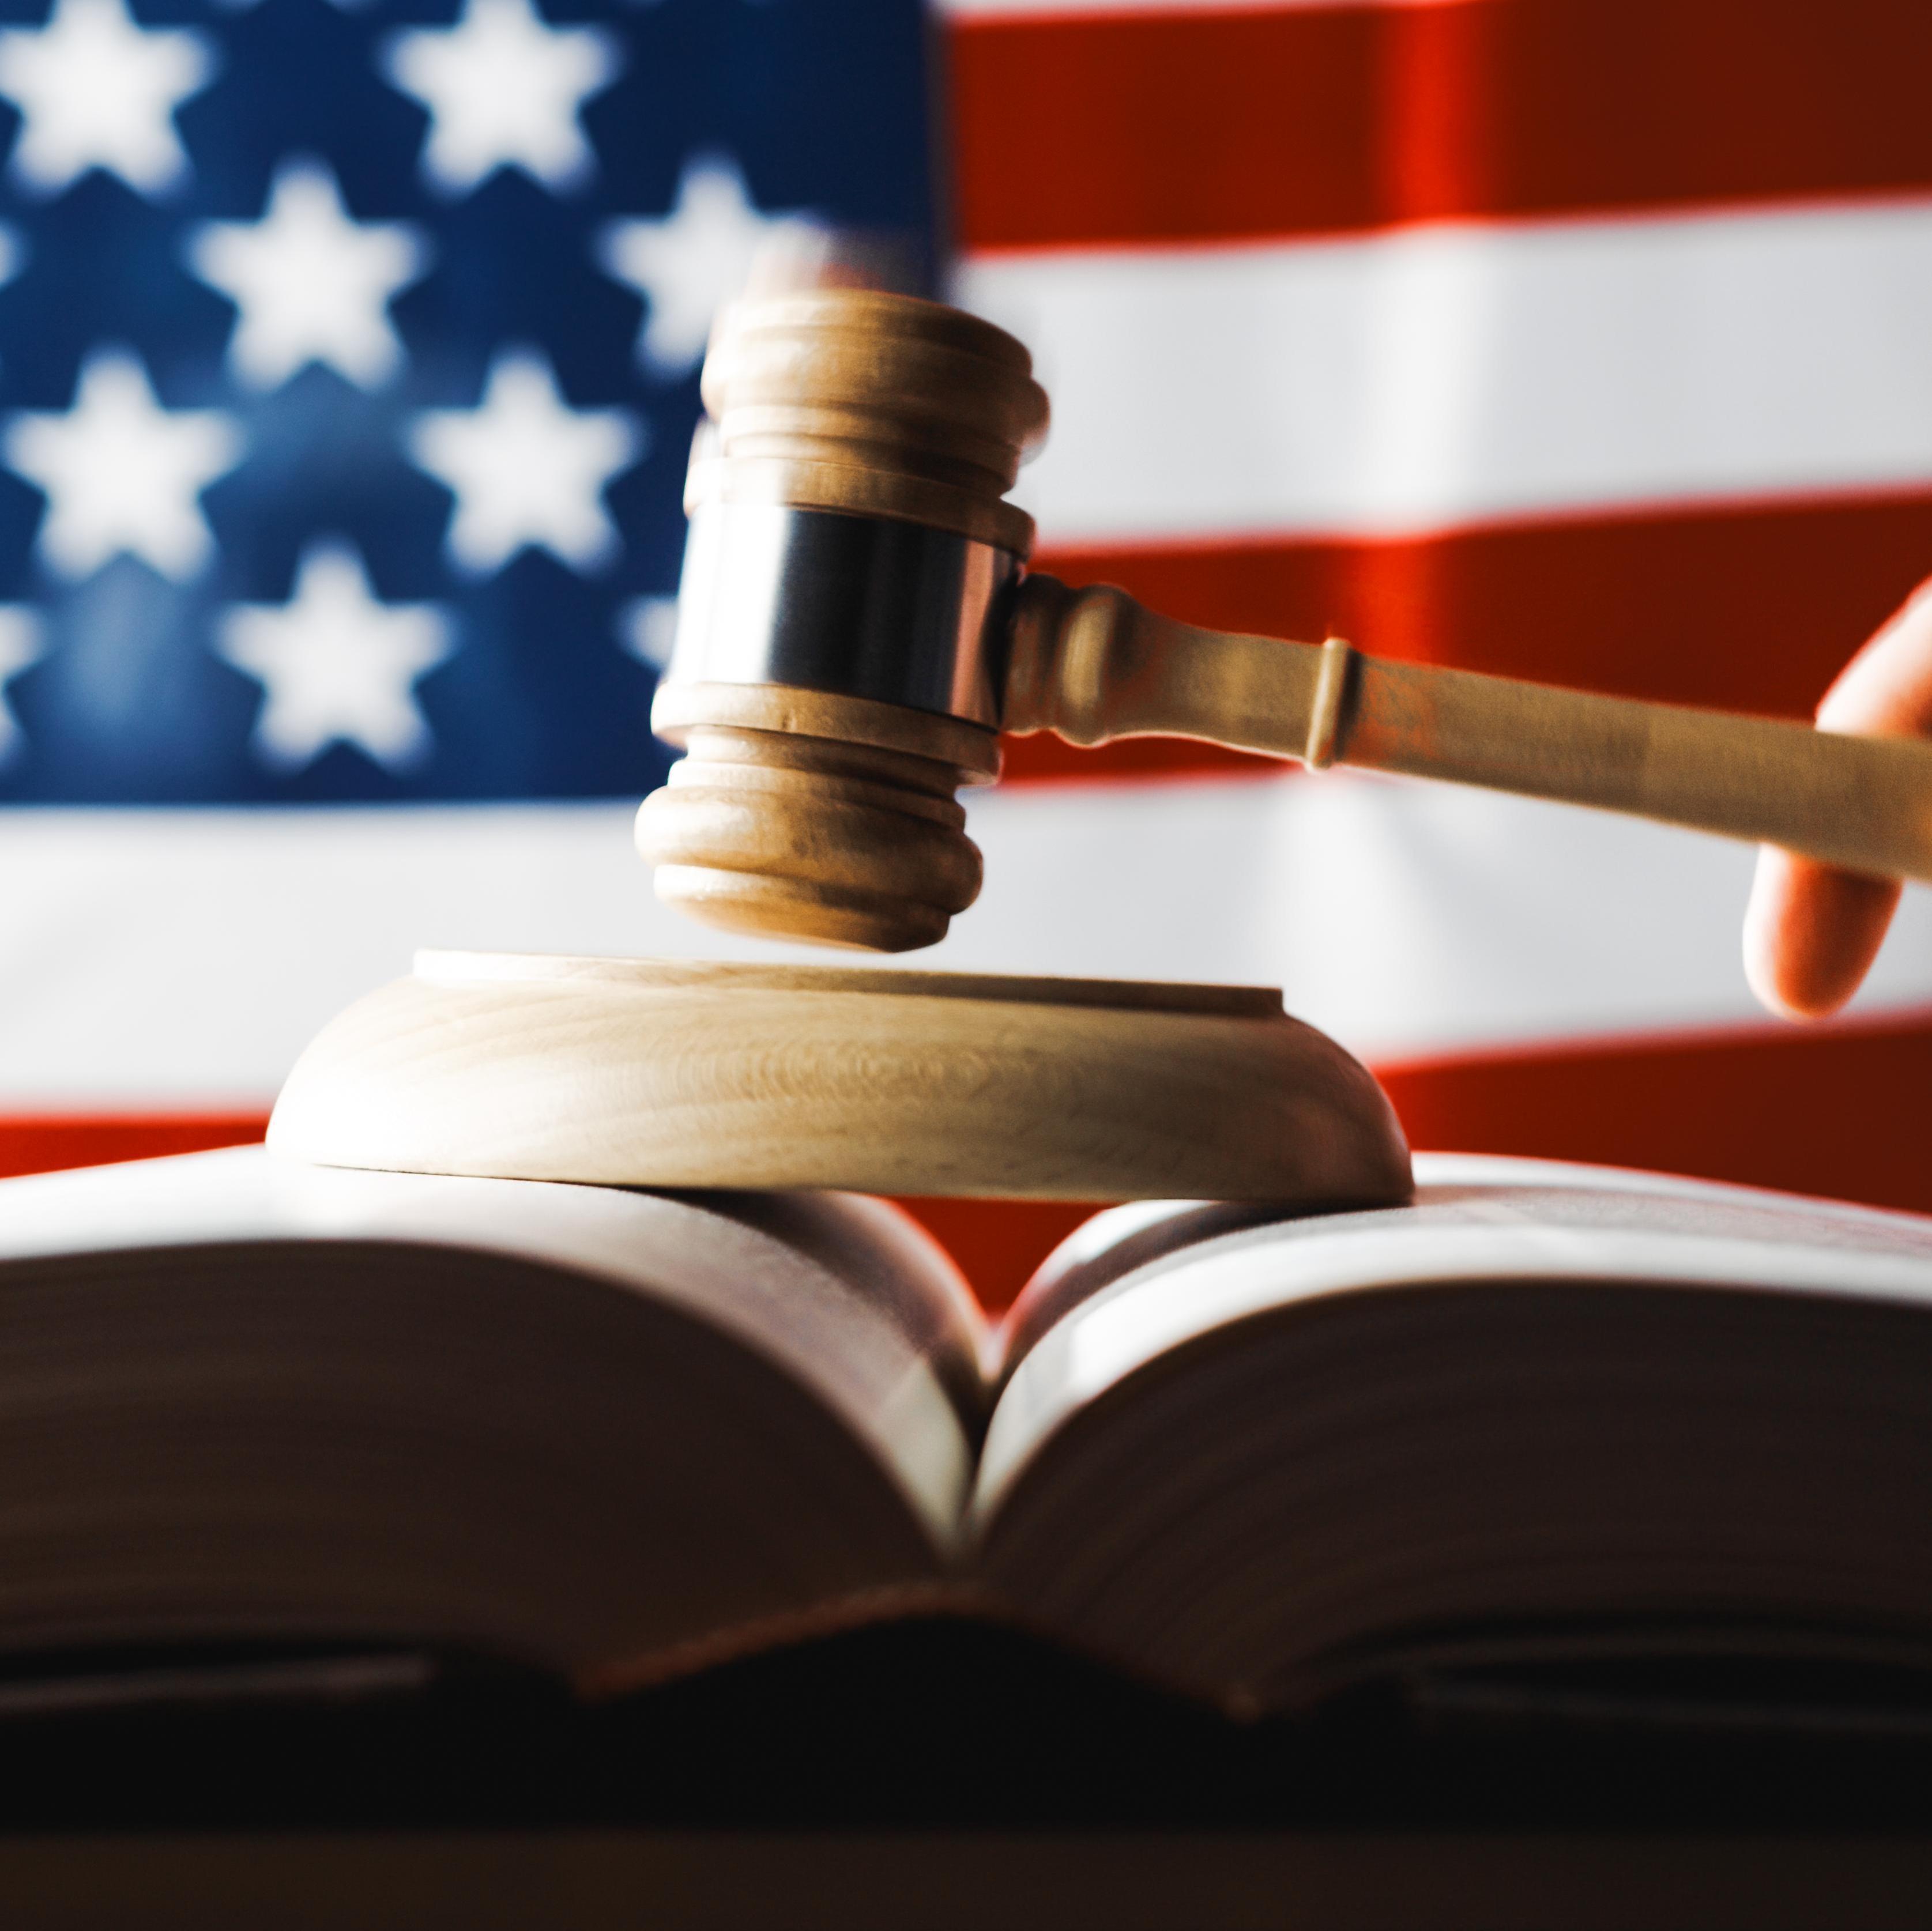 American law symbol with gavel, Bible and the US flag